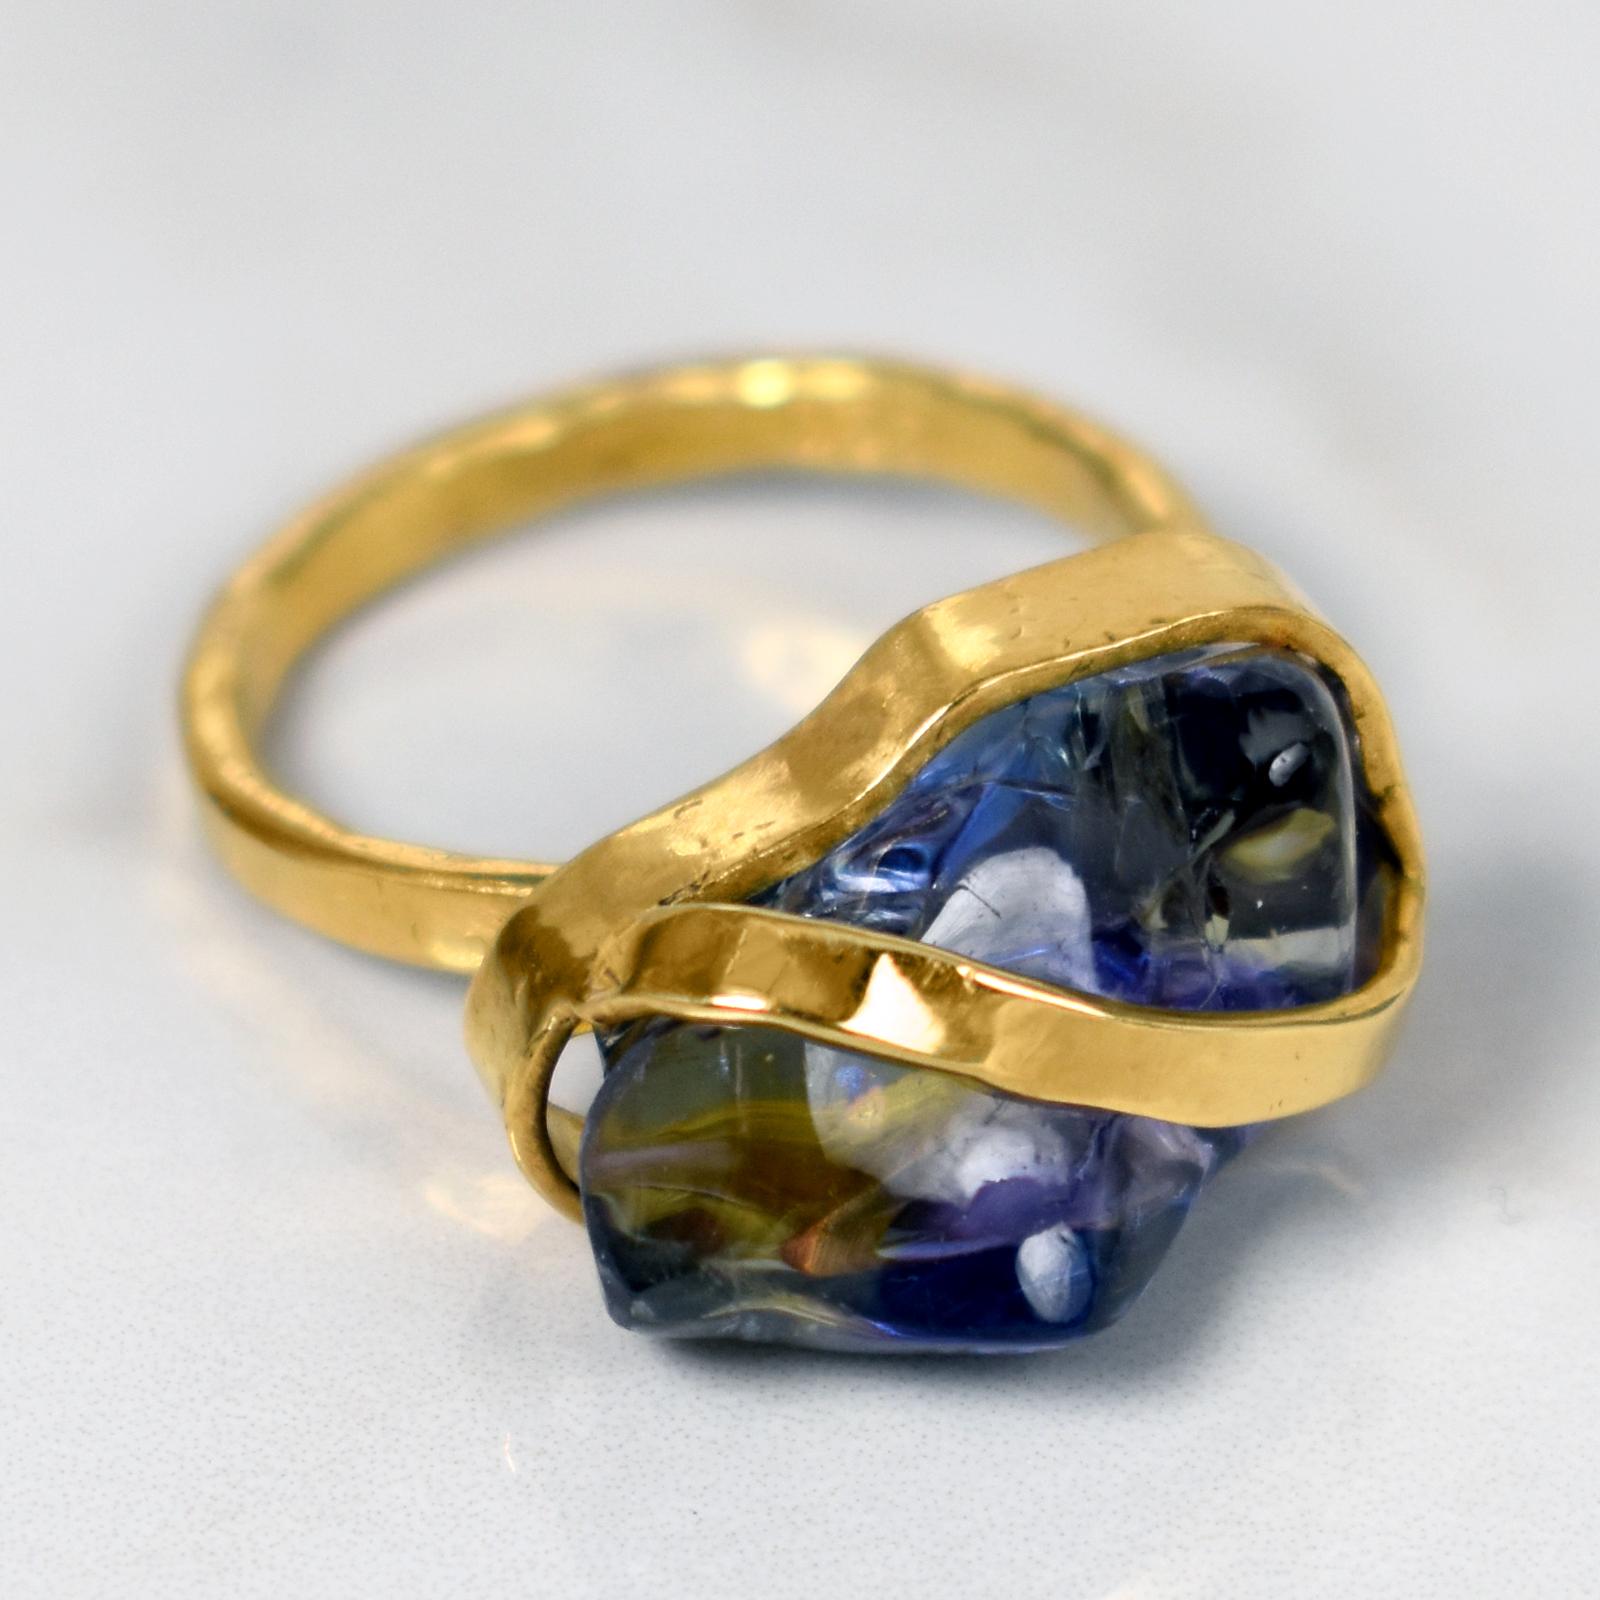 Polished, rough cut Tanzanite set in a hand-forged, 22k yellow gold ribbon cocktail ring. Size 7. Gorgeous gemstone in a minimal, contemporary ring.